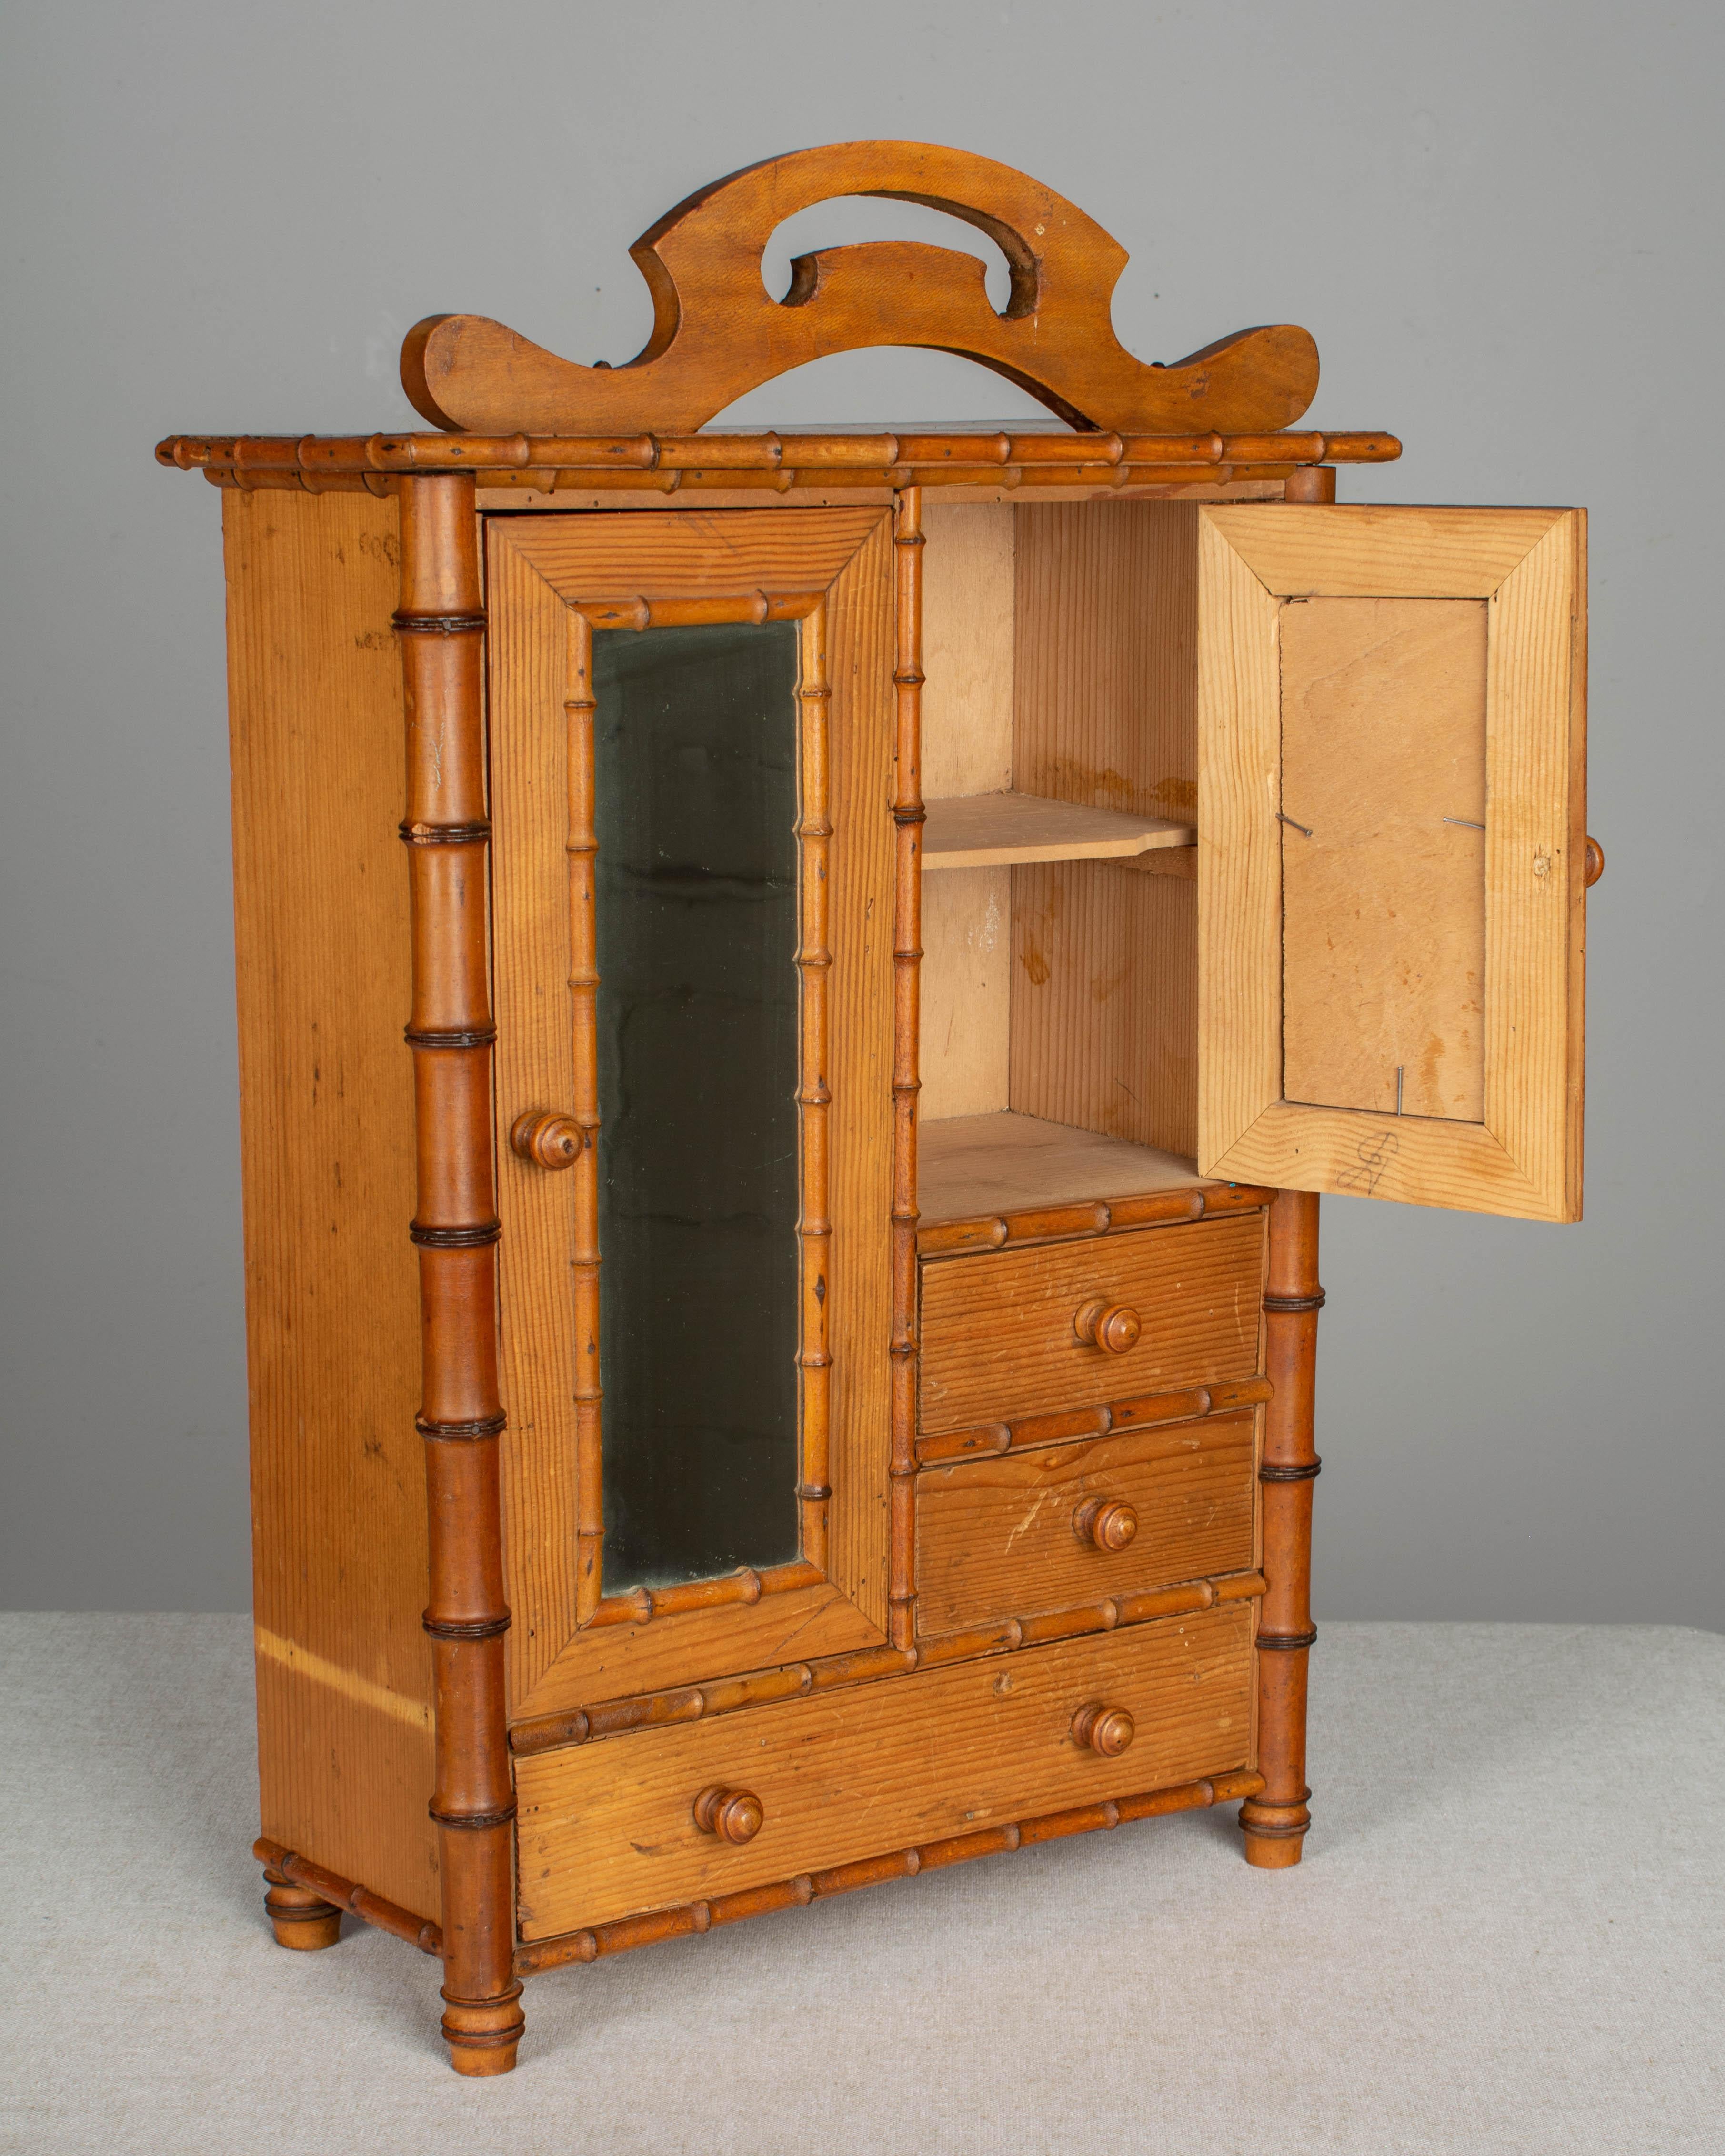 A French faux bamboo doll furniture armoire made of cherry and pine. In good condition with two pieces of trim missing. The back foot was replaced with a cork and the smaller mirror has been replaced.